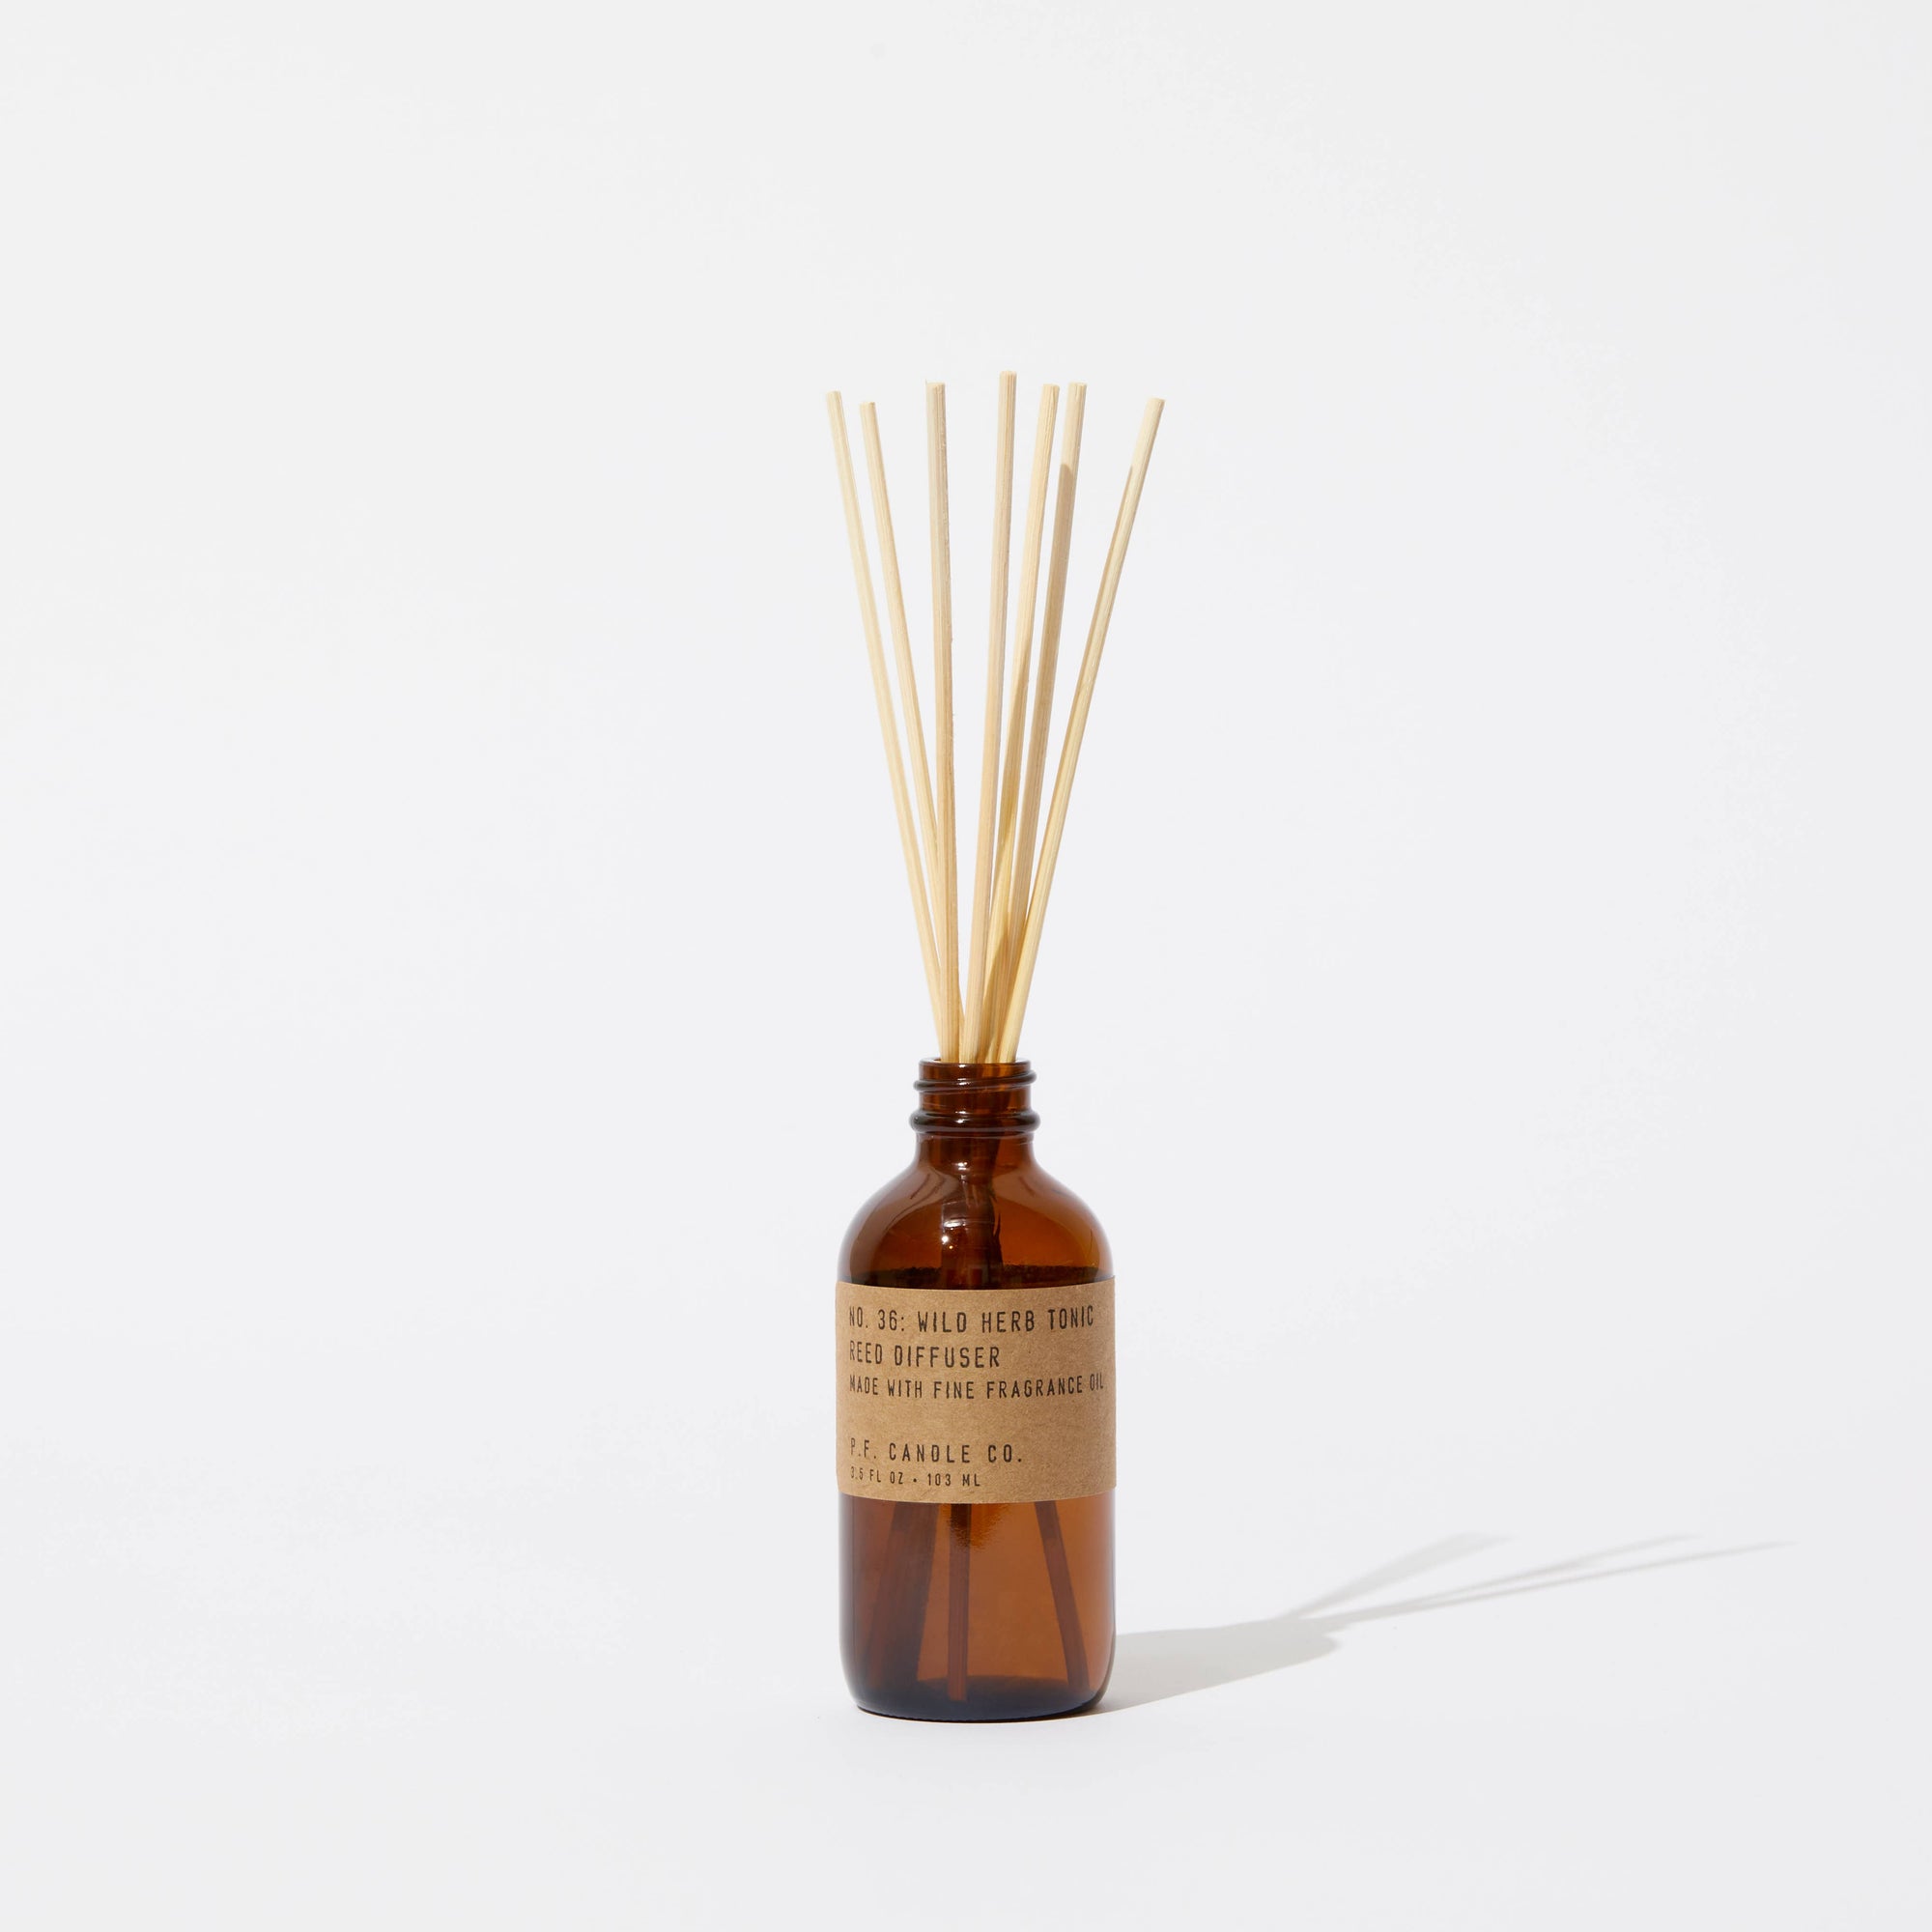 Wild Herb Tonic Diffuser by P.F Candle Co.